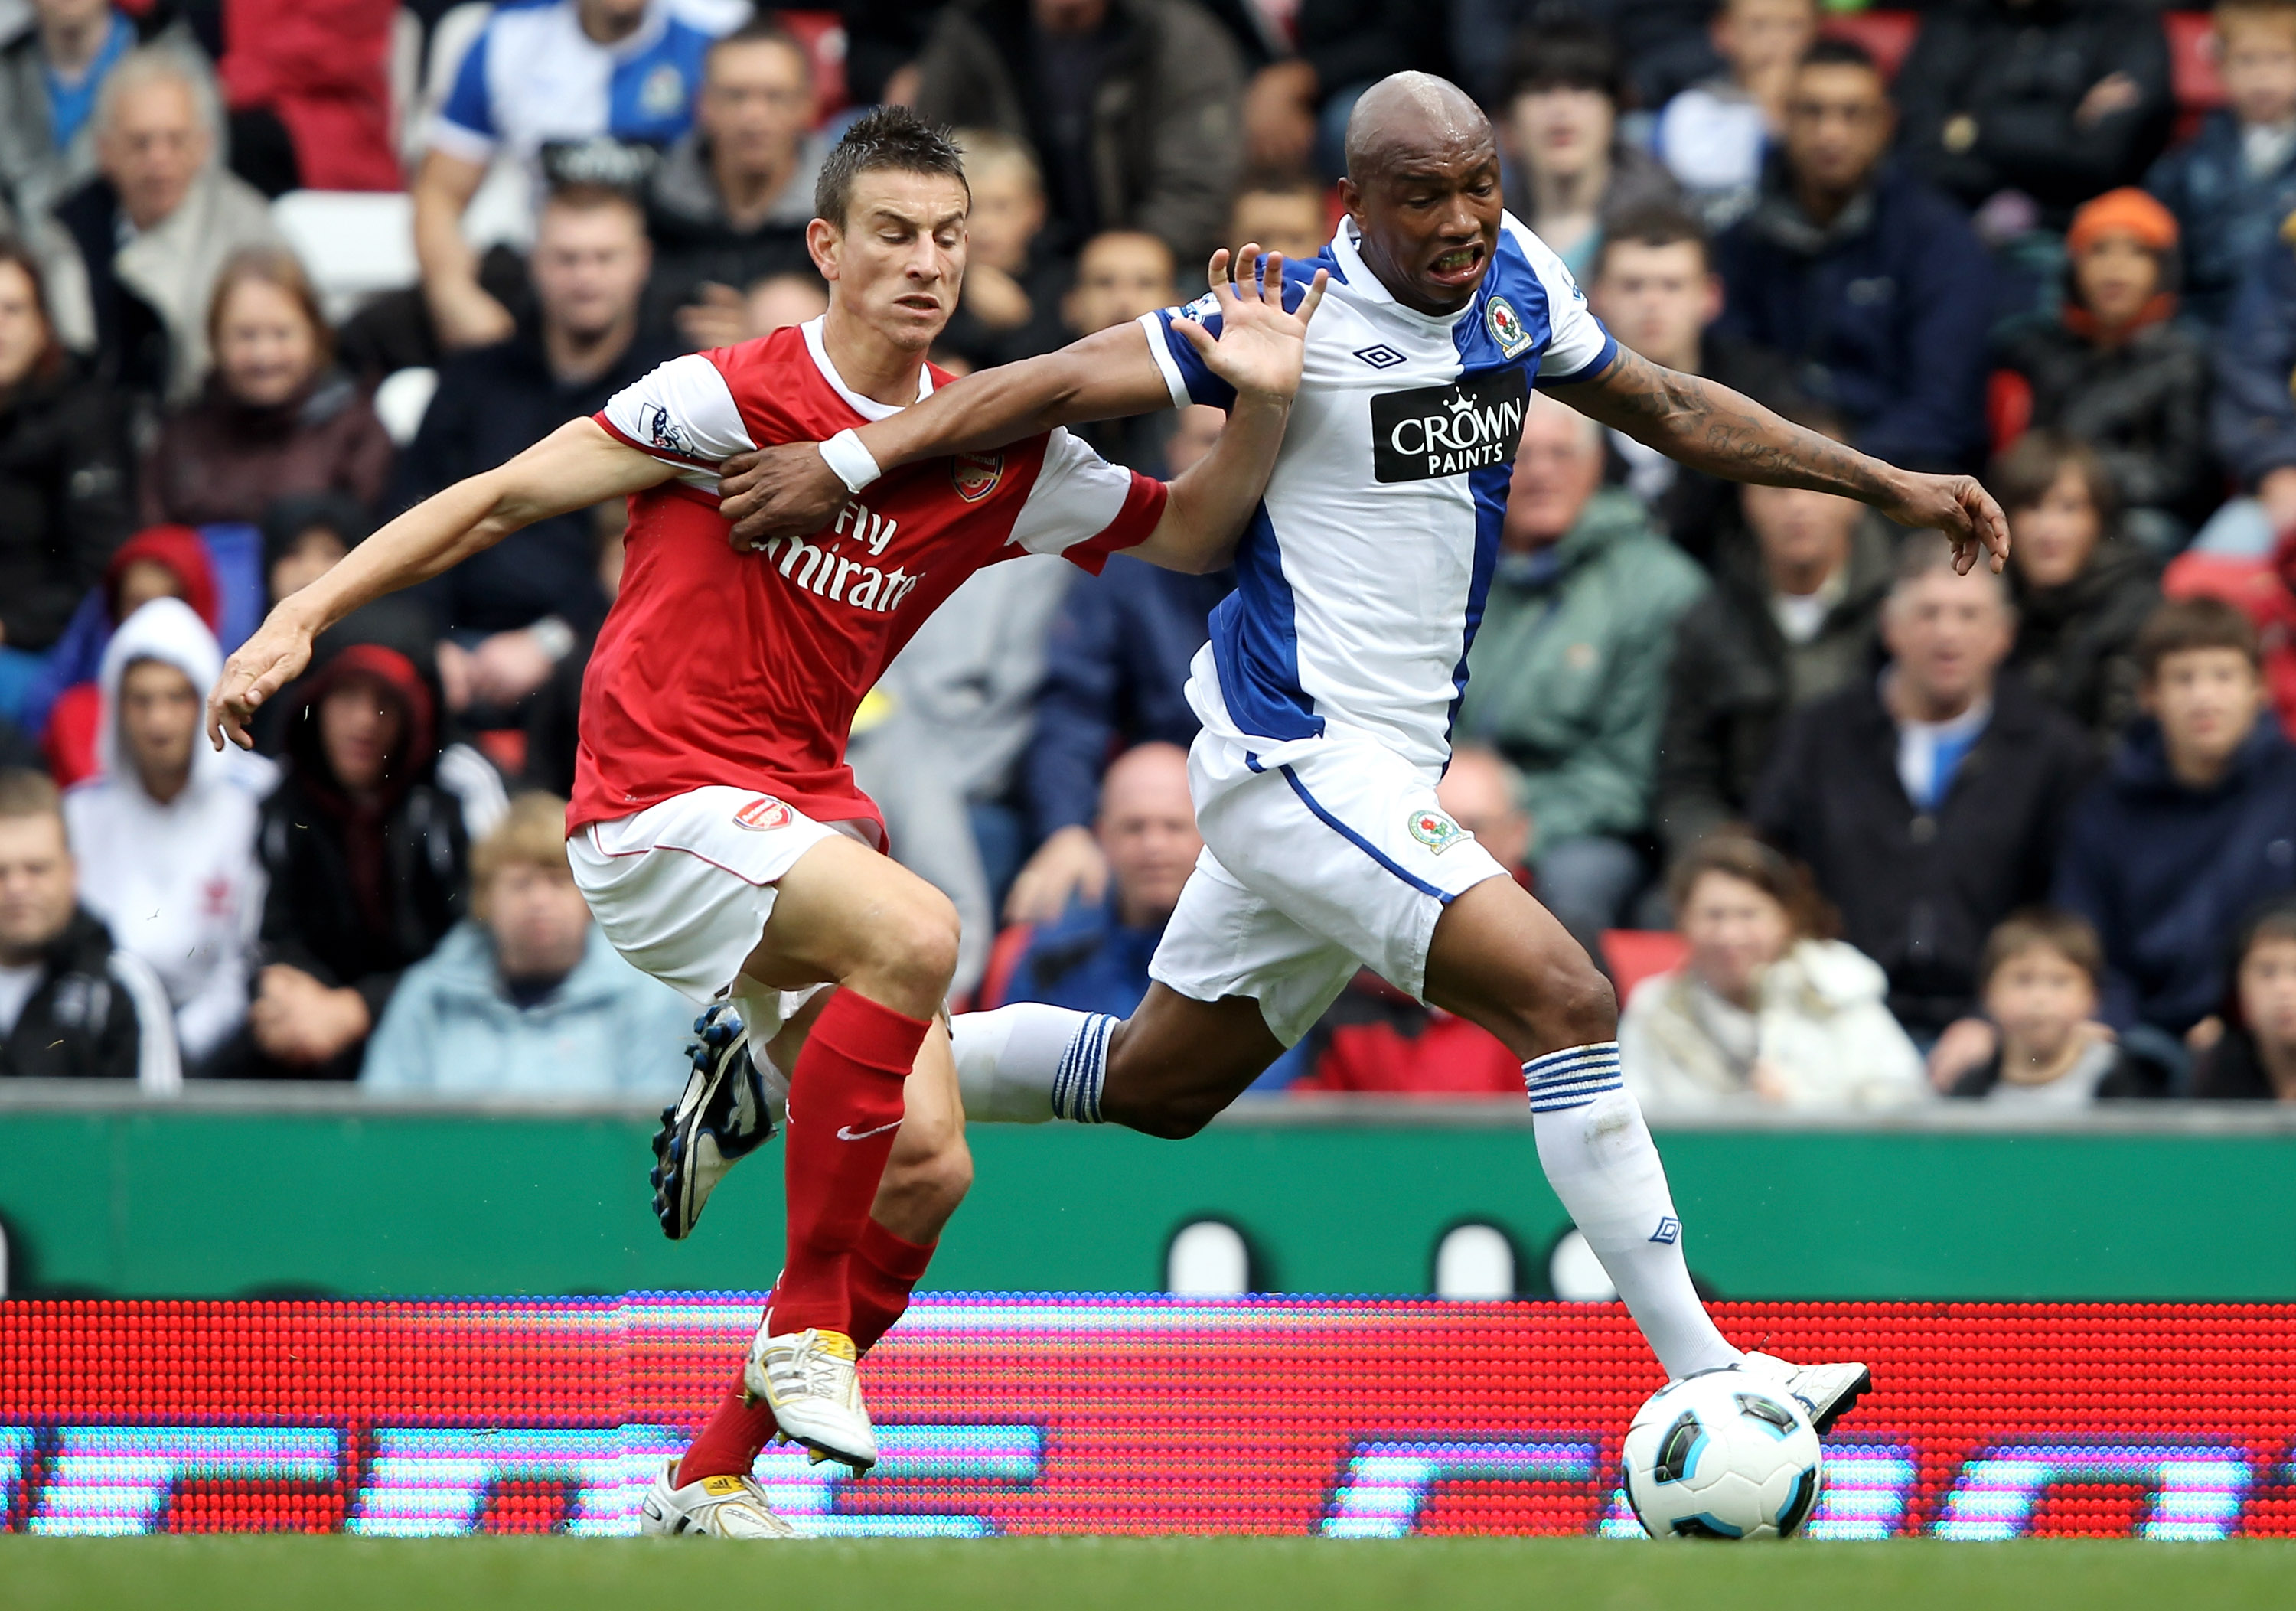 BLACKBURN, ENGLAND - AUGUST 28:  Laurent Koscielny of Arsenal tussles for posession with El Hadji Diouf of Blackburn Rovers during the Barclays Premier League match between Blackburn Rovers and Arsenal at Ewood Park on August 28, 2010 in Blackburn, Englan